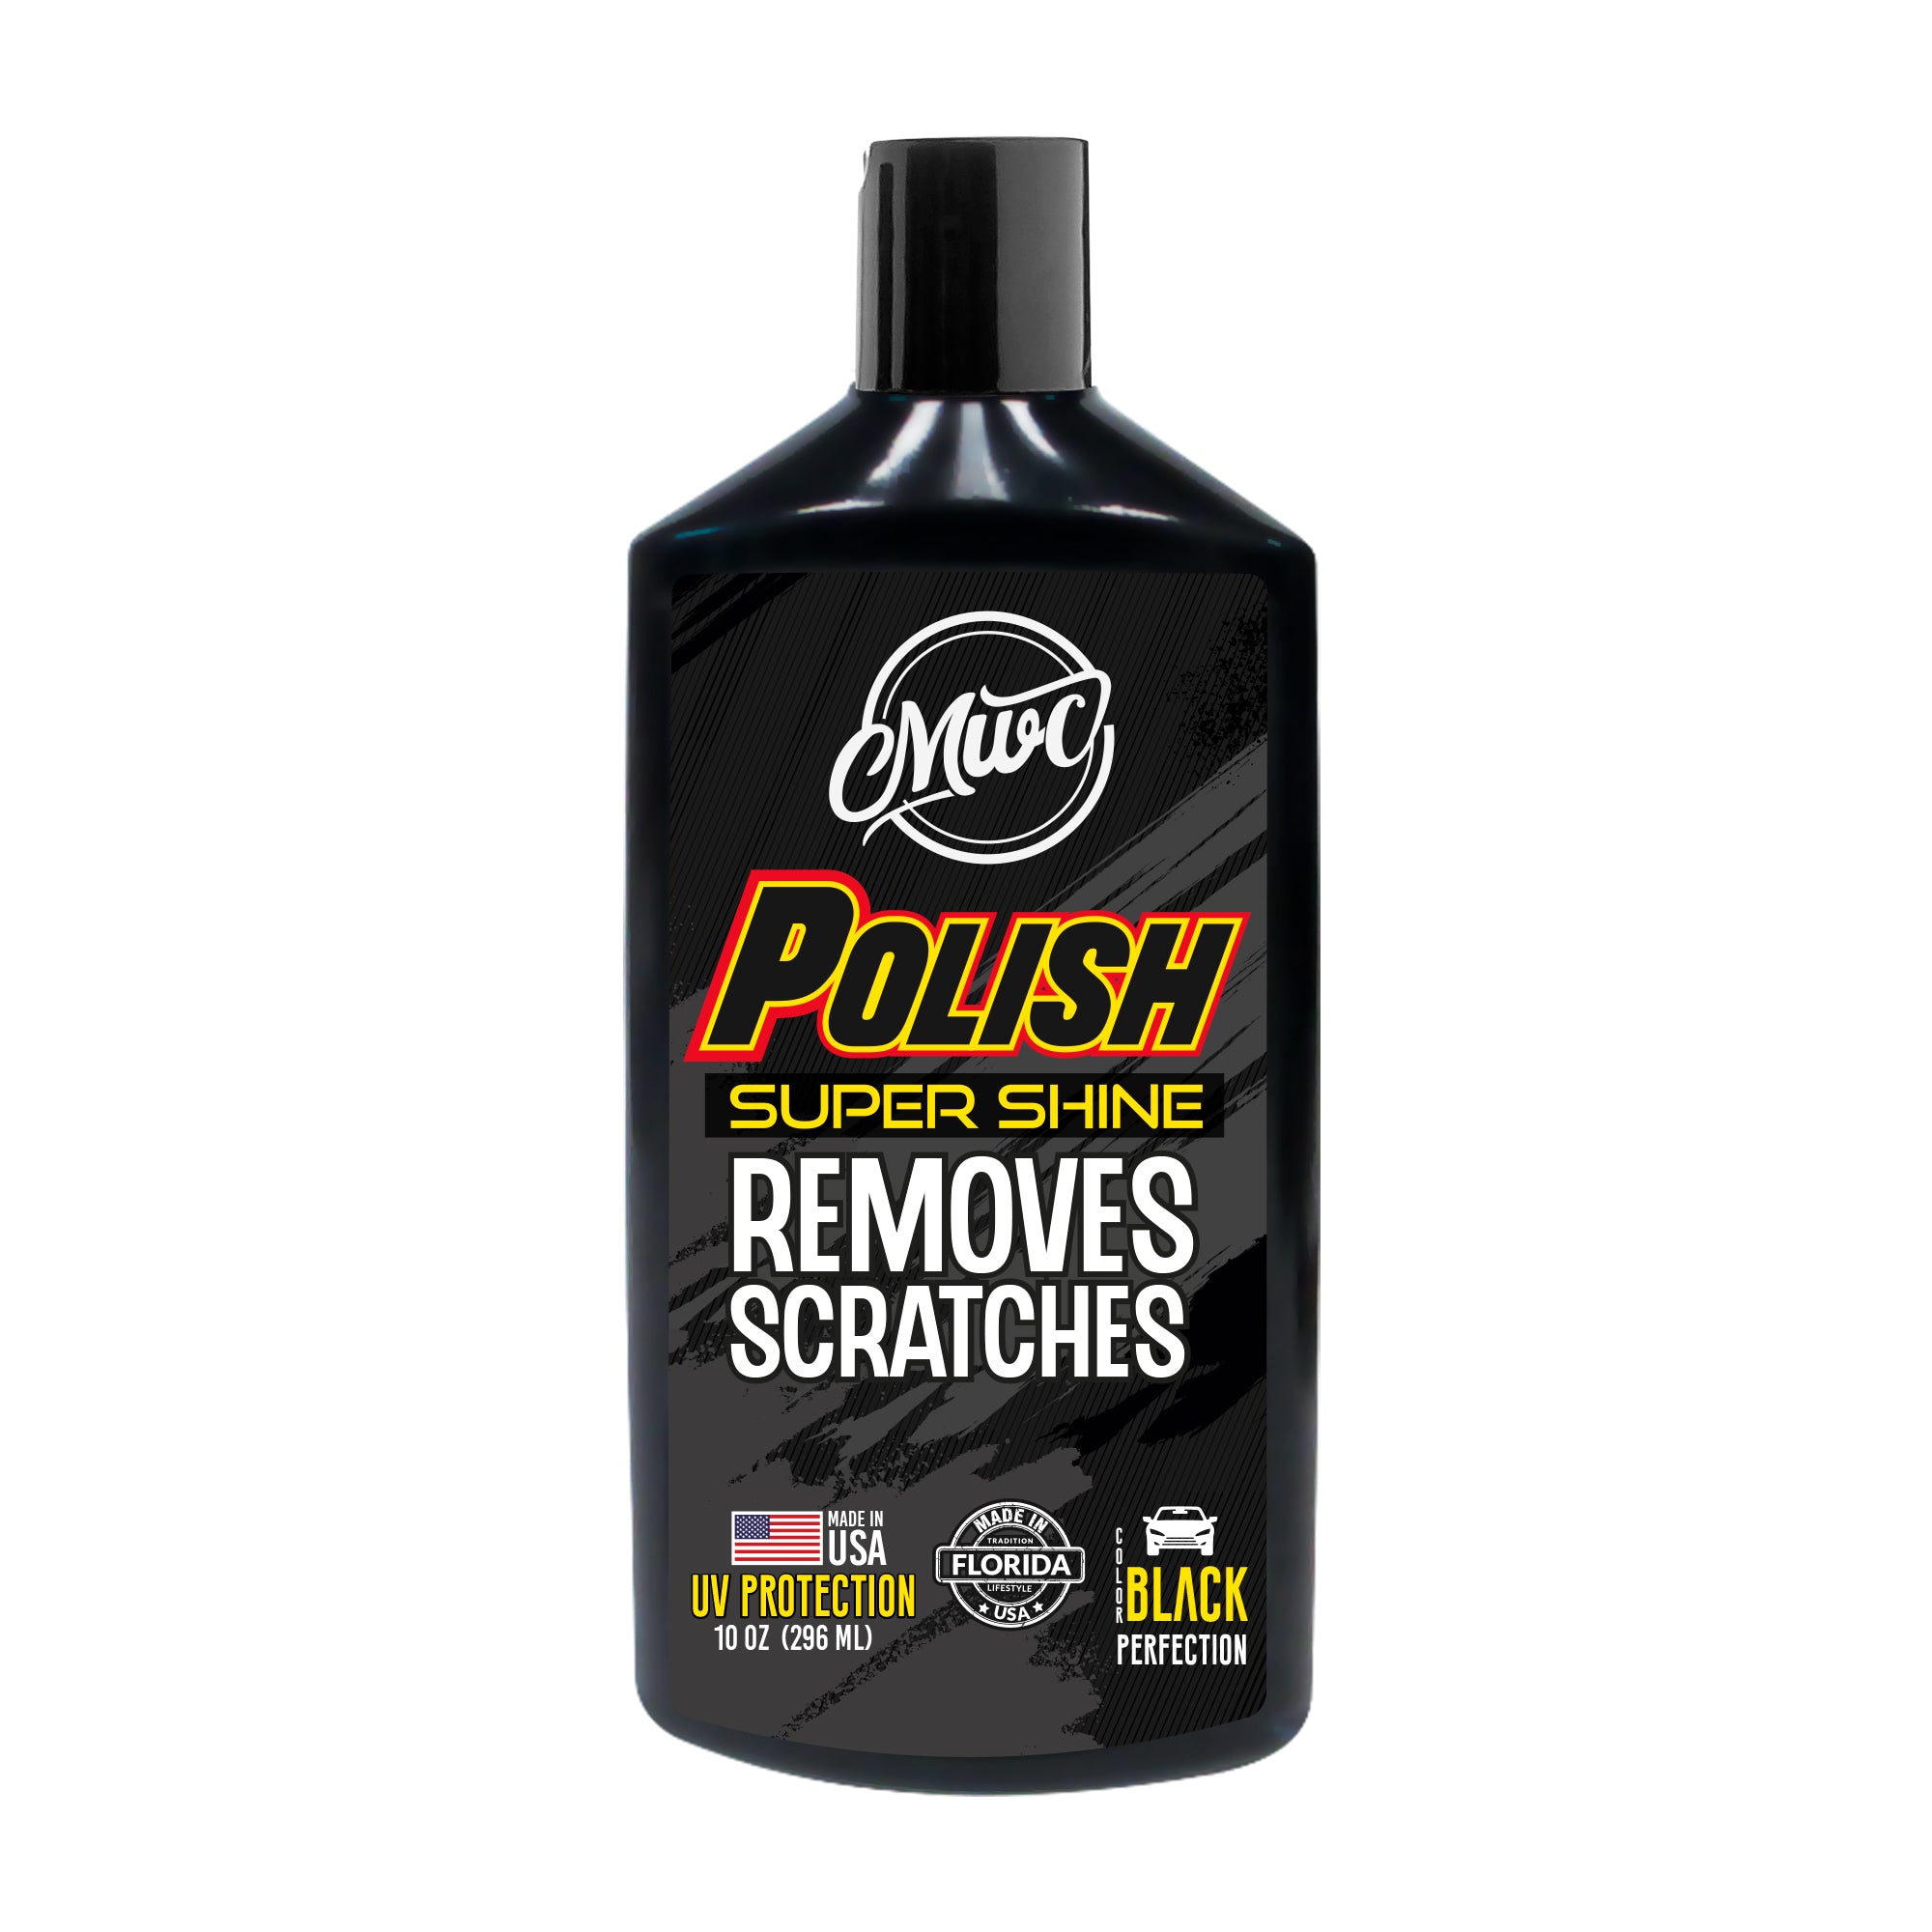 SCRATCH NO MORE - SCRATCH REMOVER – carzshiner